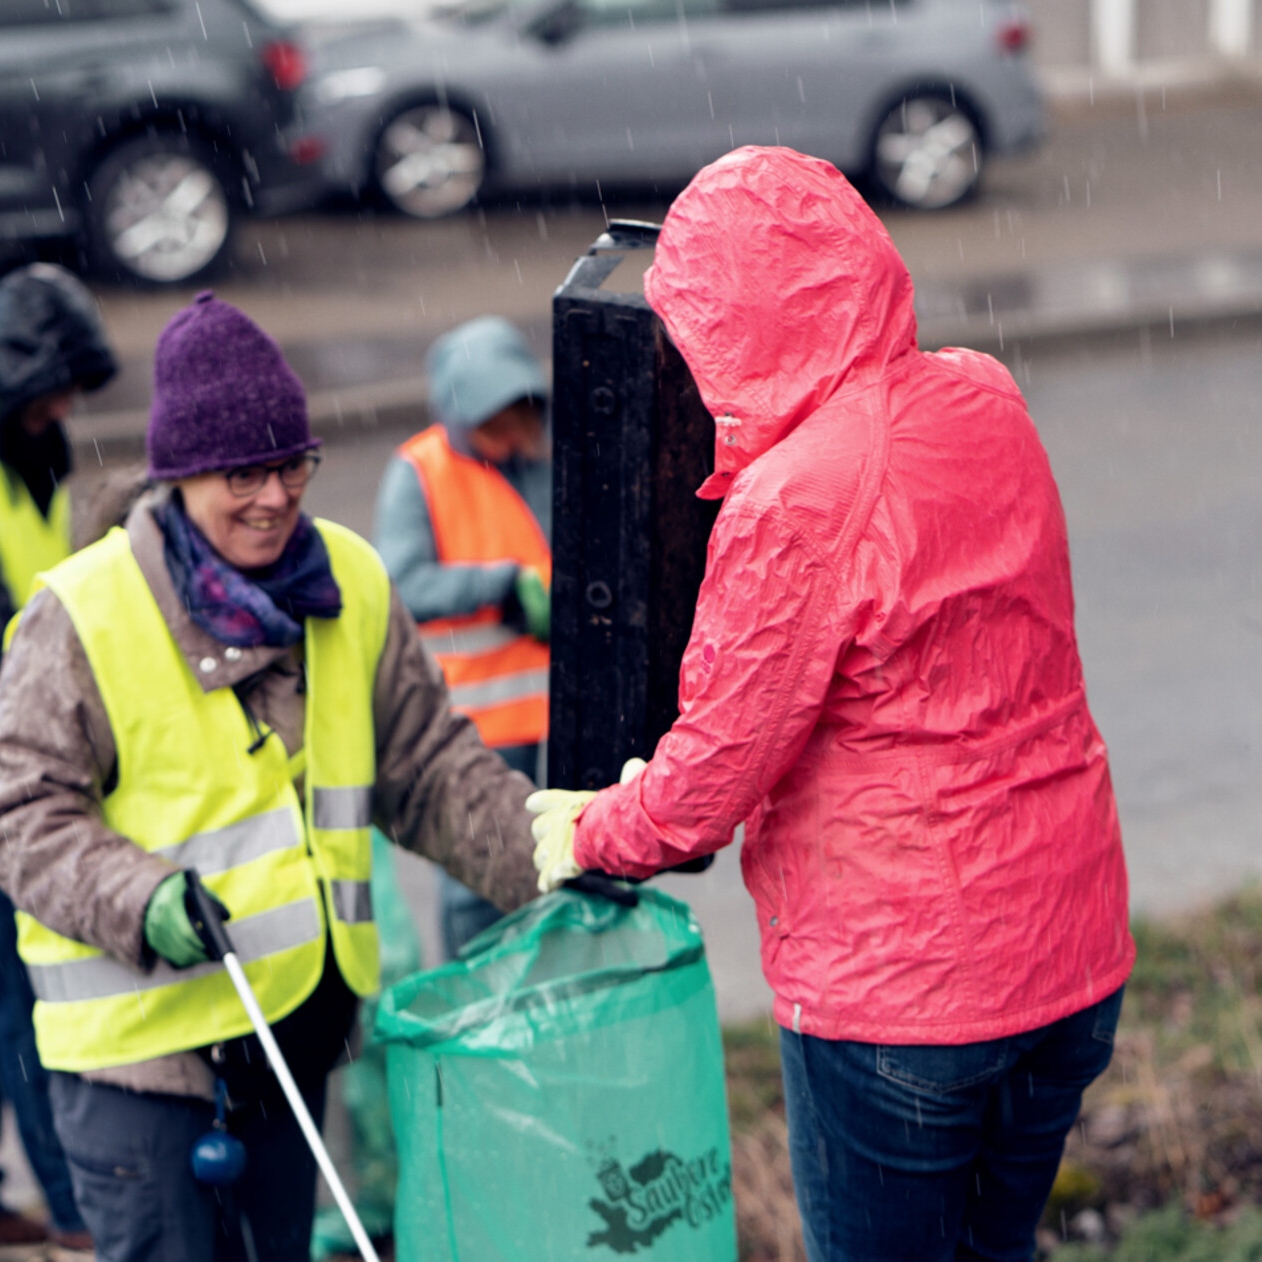 ZEISS employees picking up litter on earth day